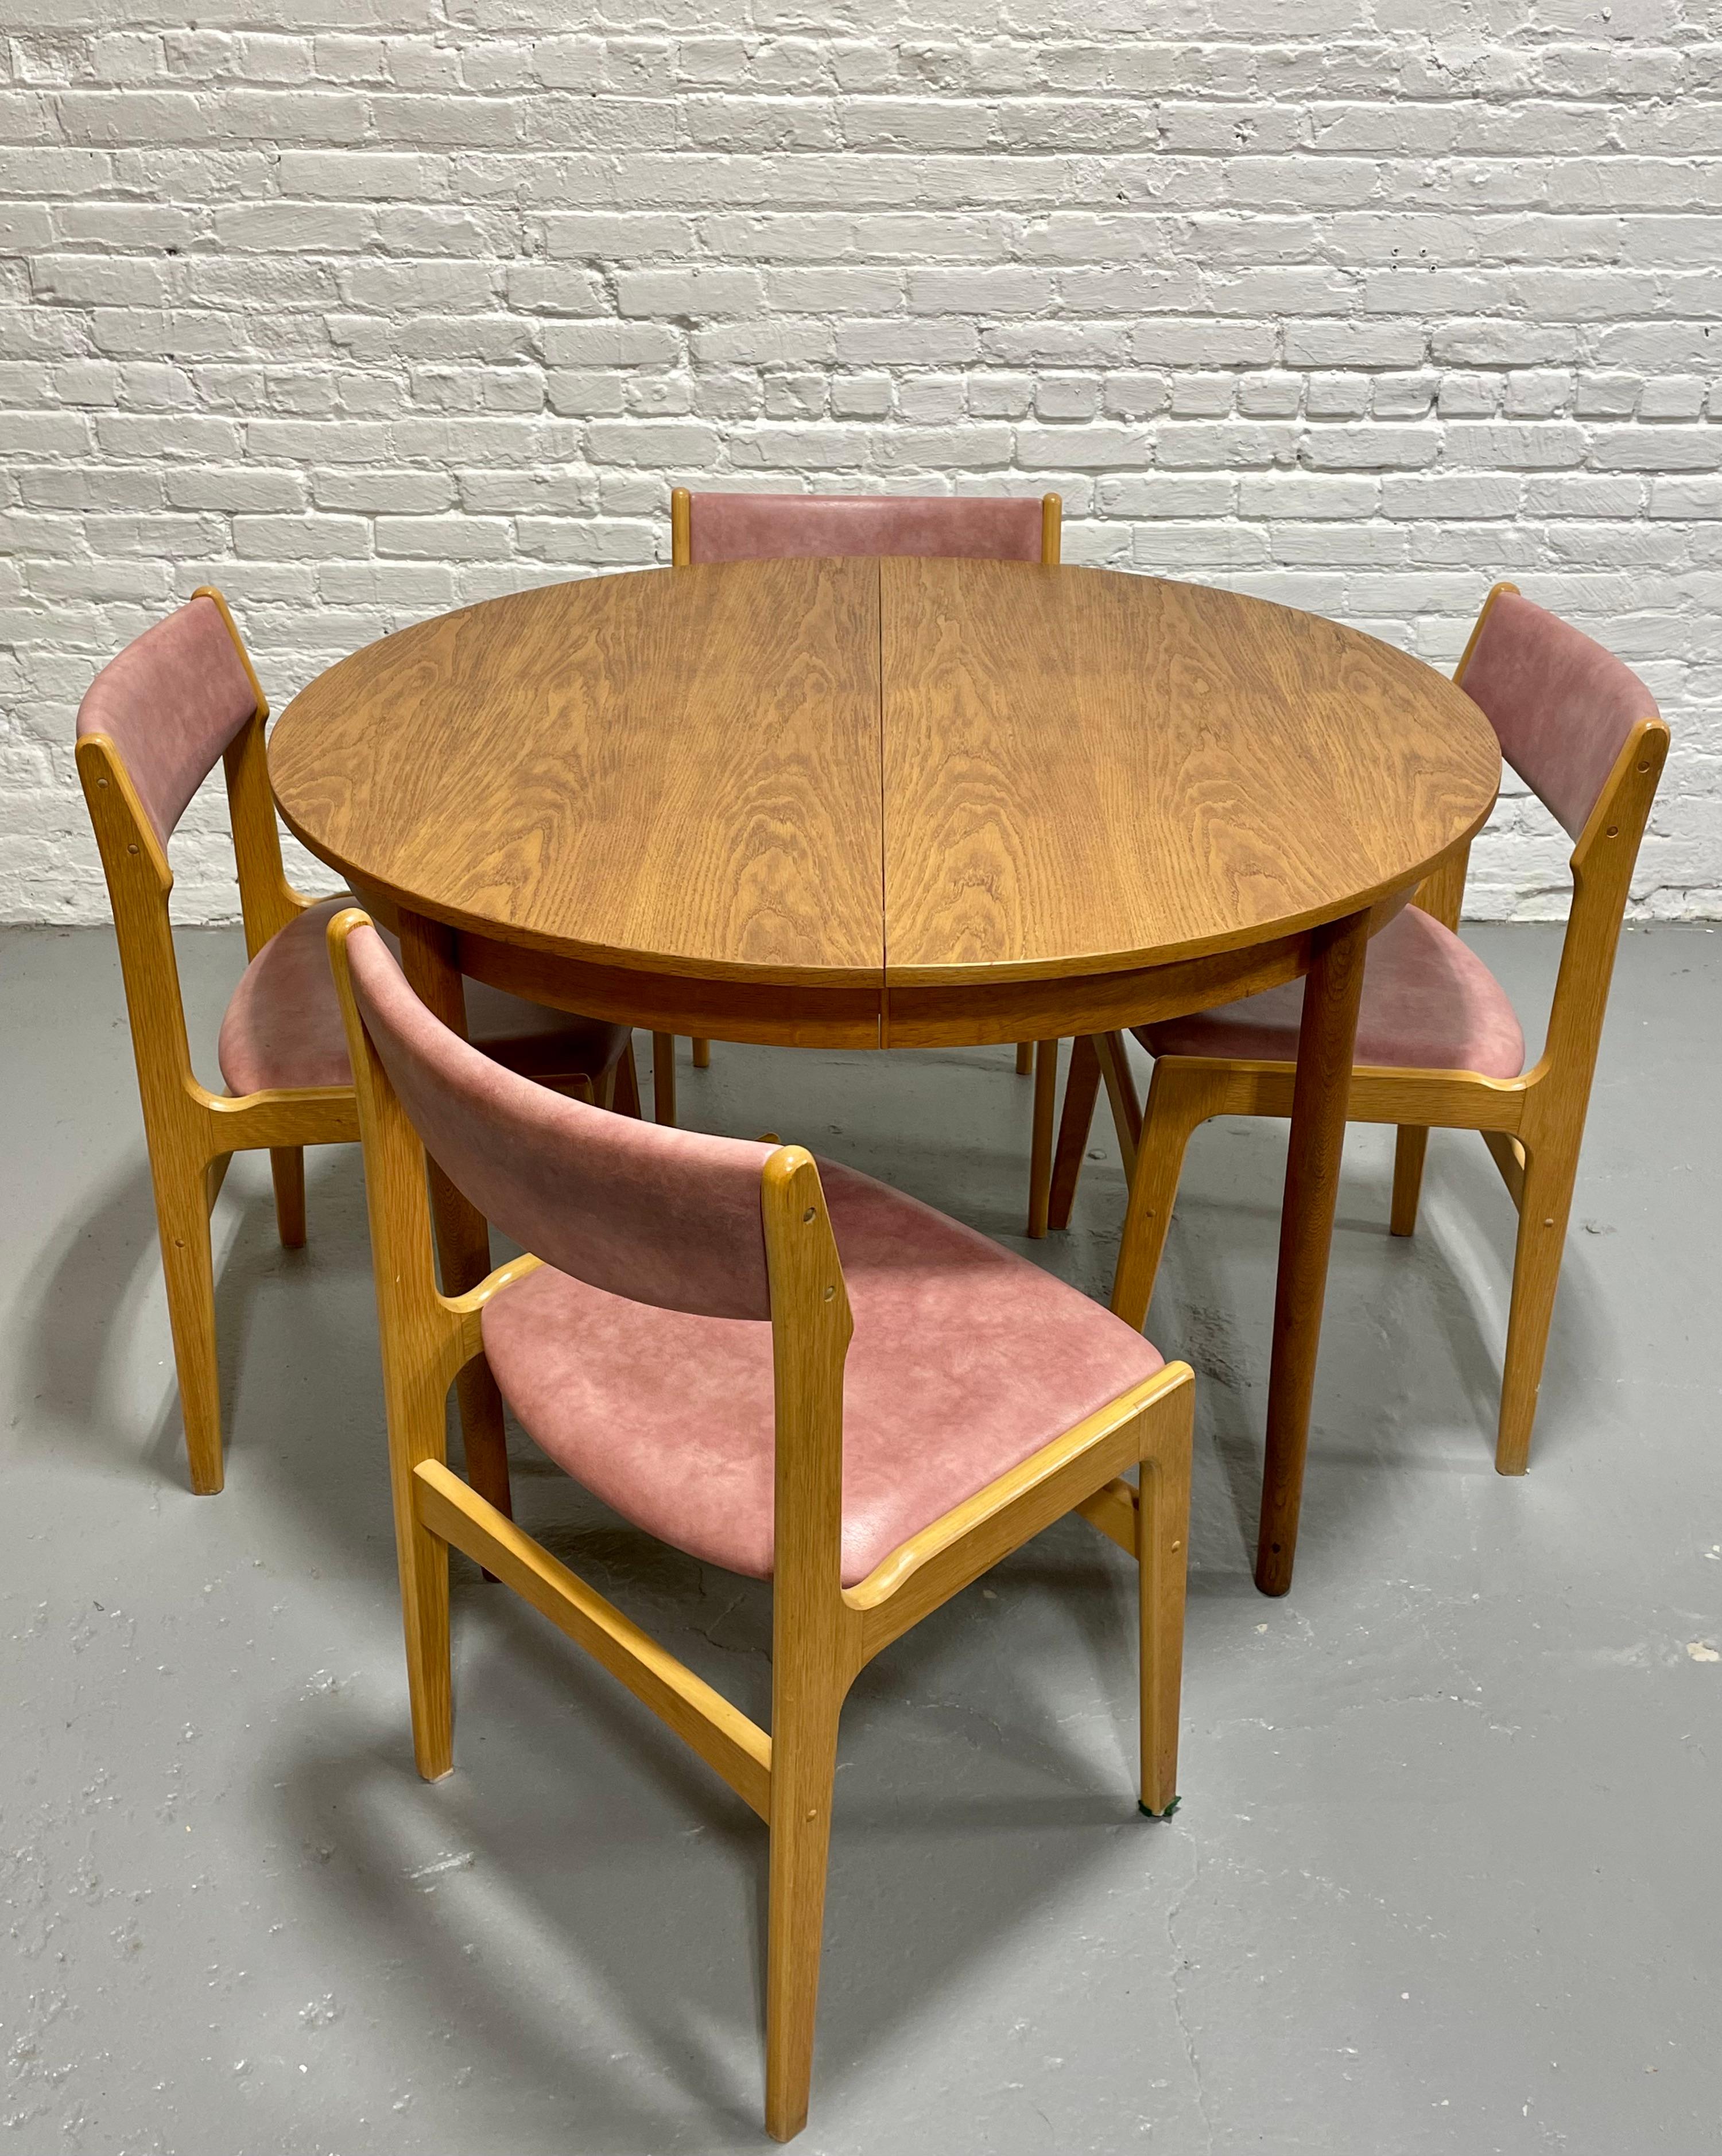 Mid Century Modern Oak Dining Table attributed to Borge Mogensen, Made in Denmark, c. 1960's. This solid oak table transforms from a round to a lovely oval table that comfortably seats 6 guests.  Perfect when space is limited - comfortably seat 4